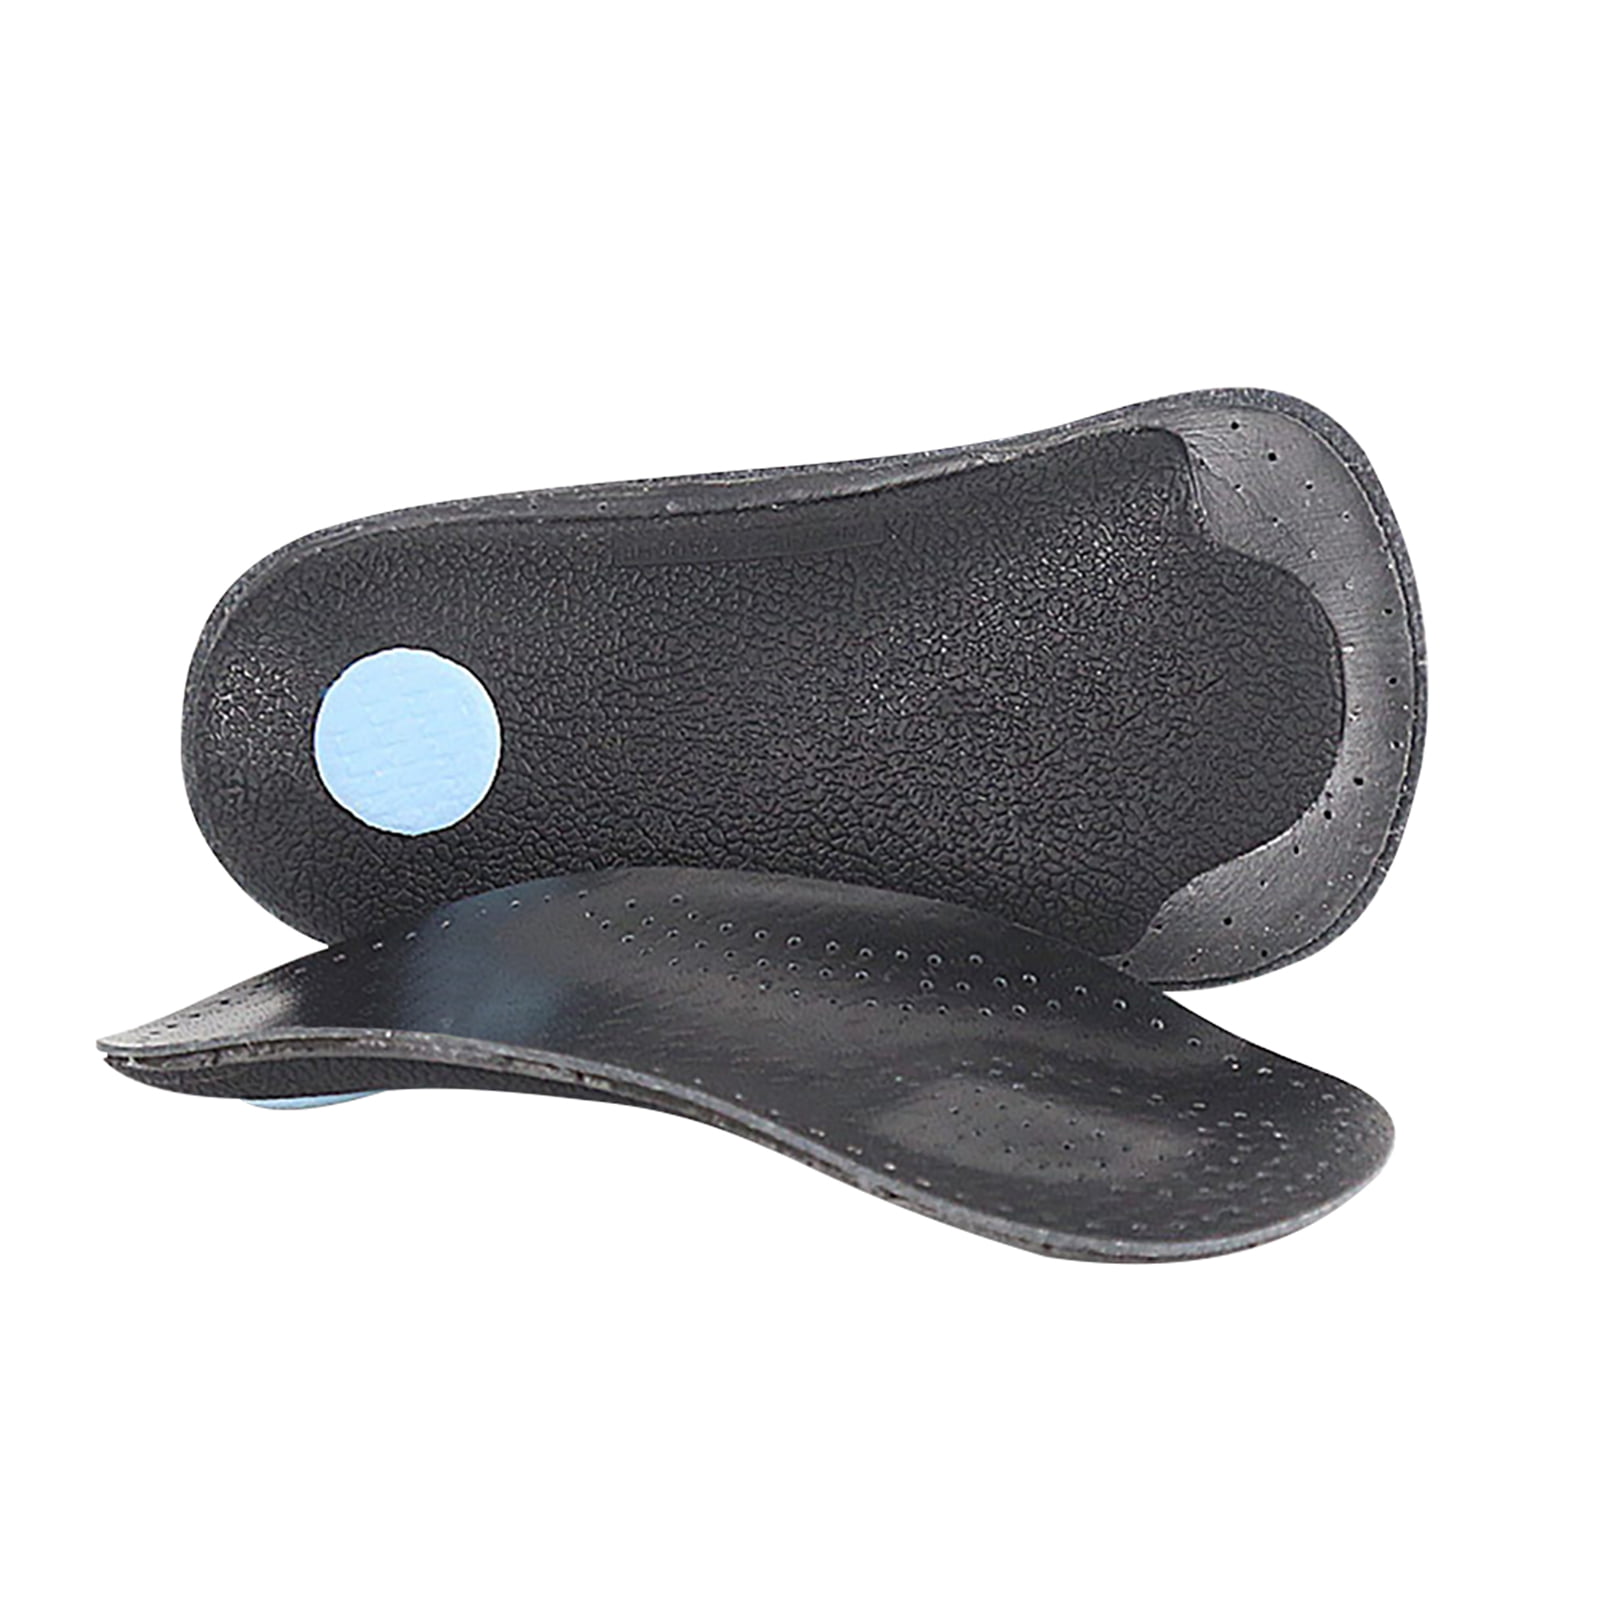 Details about   Orthotic High Arch Support Insoles Flat Shoe Feet Inserts Plantar Fasciitis Foot